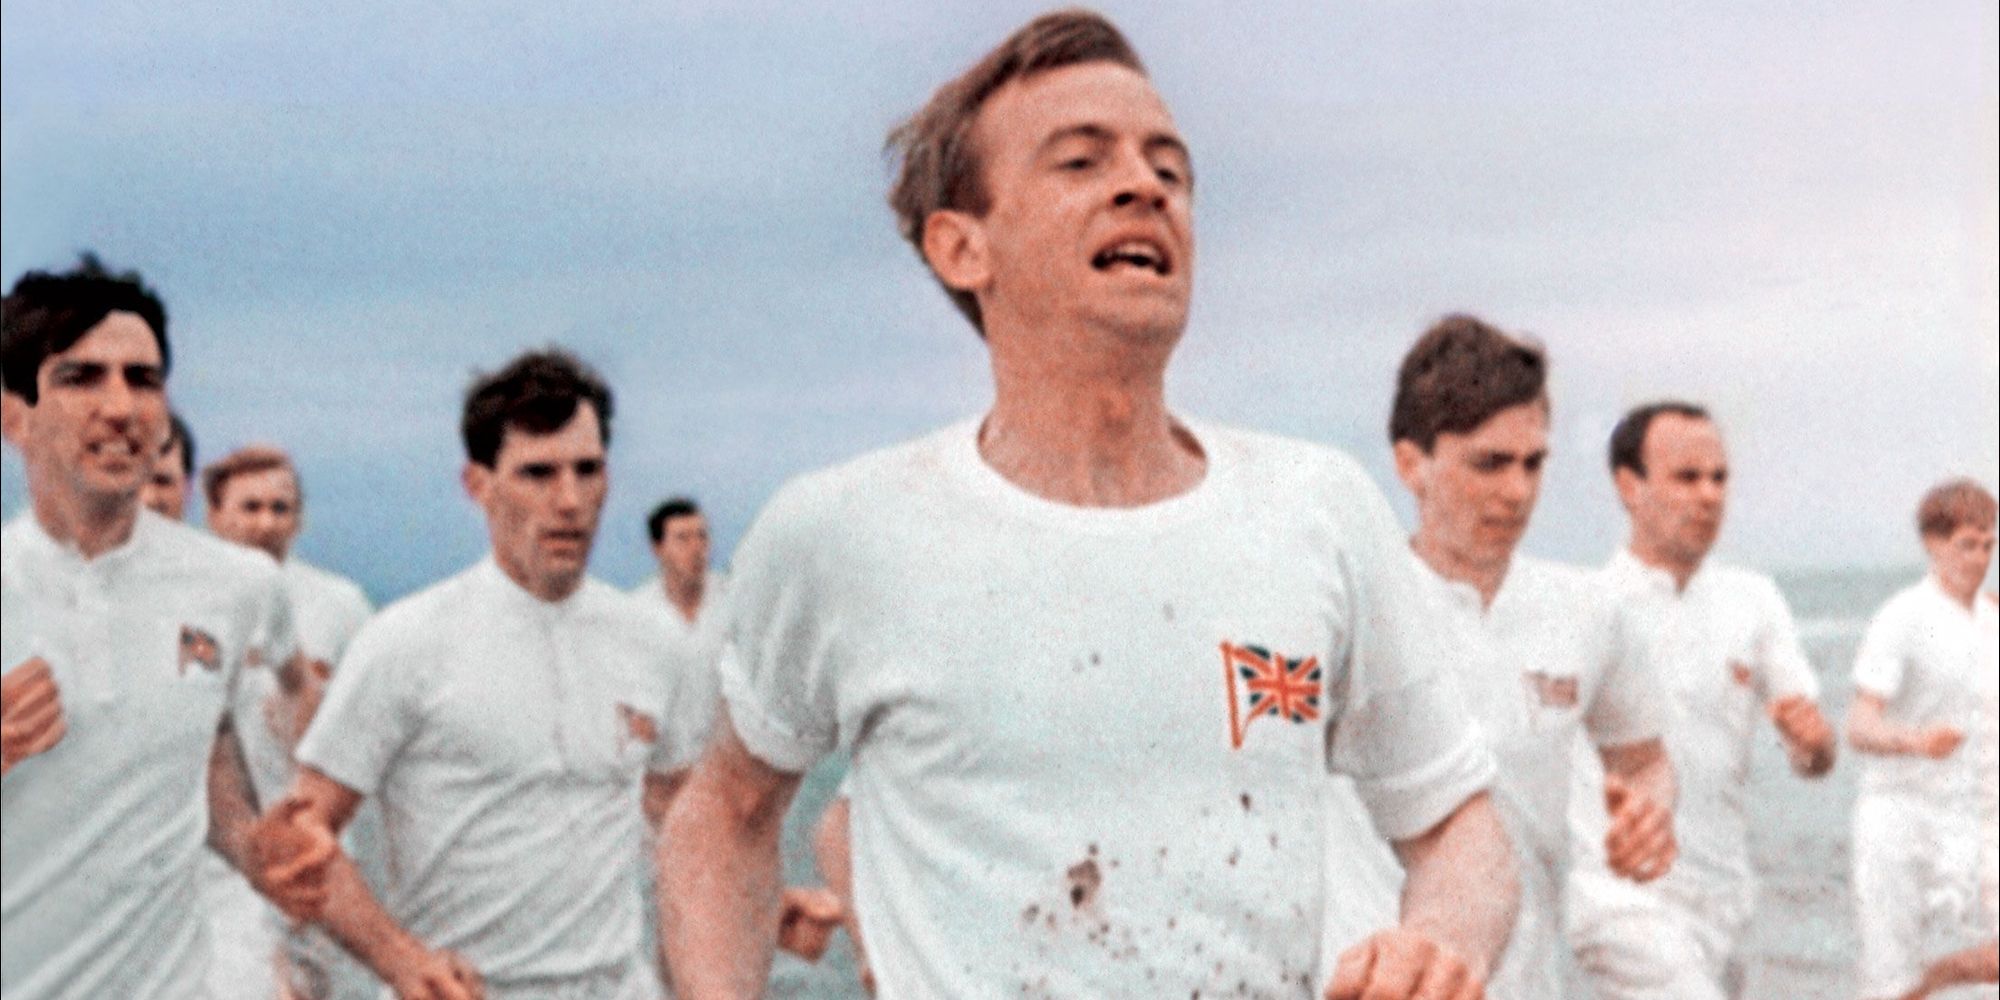 A group of young men running on the beach in Chariots of Fire